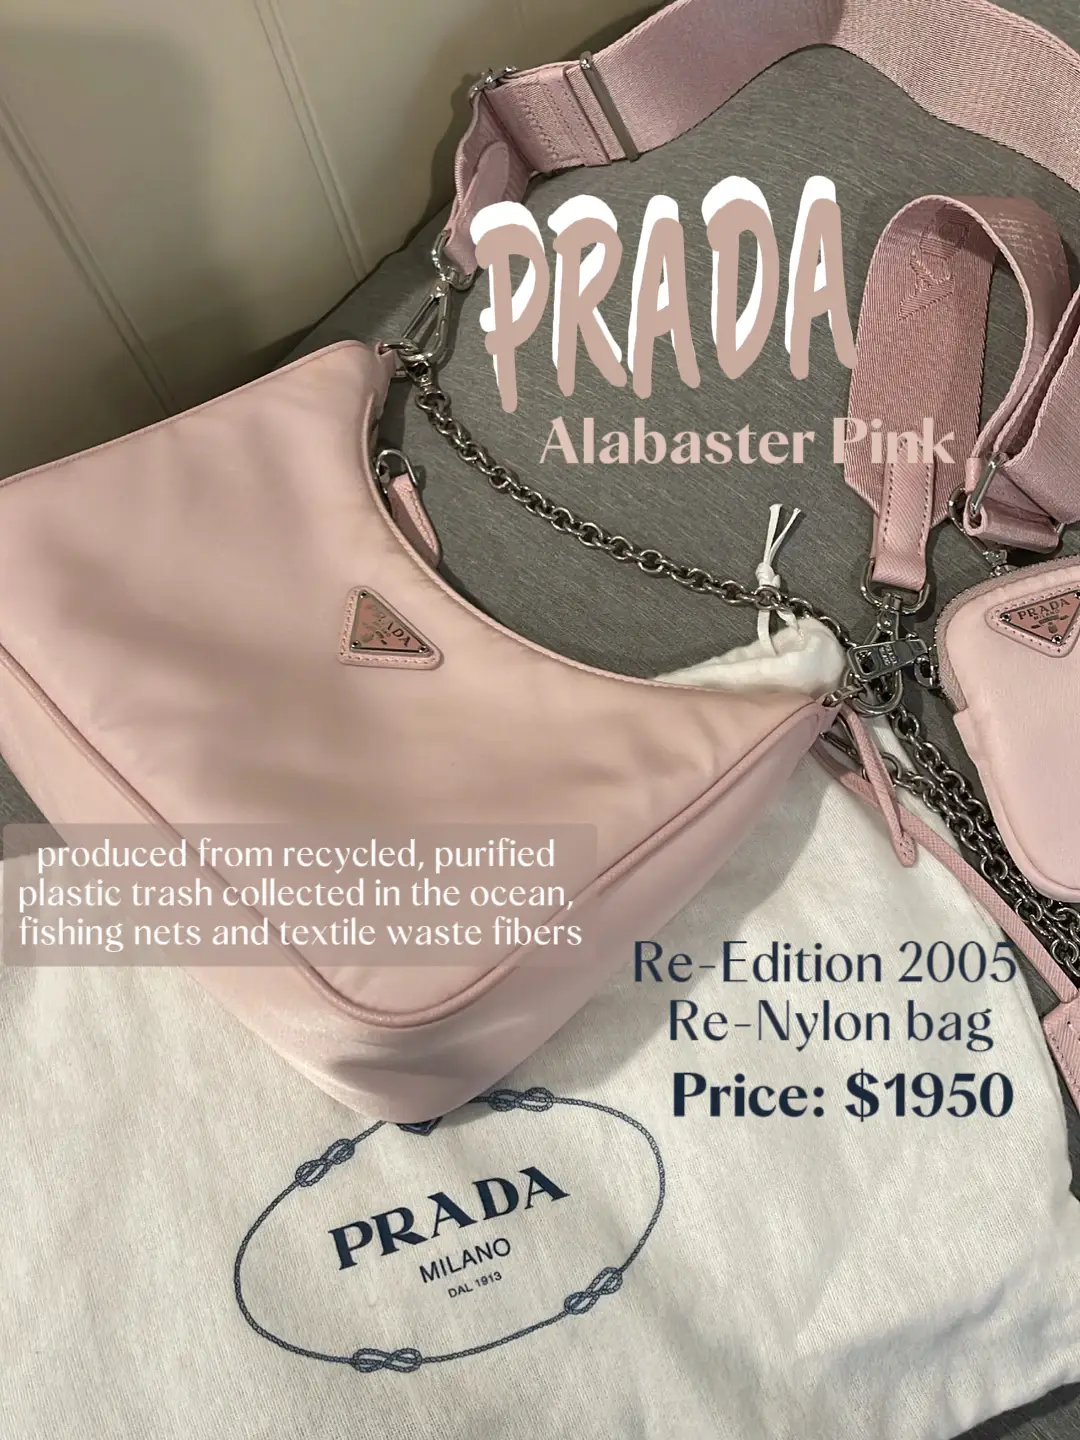 UNBOXING THE PRADA RE-EDITION 2005 SAFFIANO LEATHER BAG + REVIEW